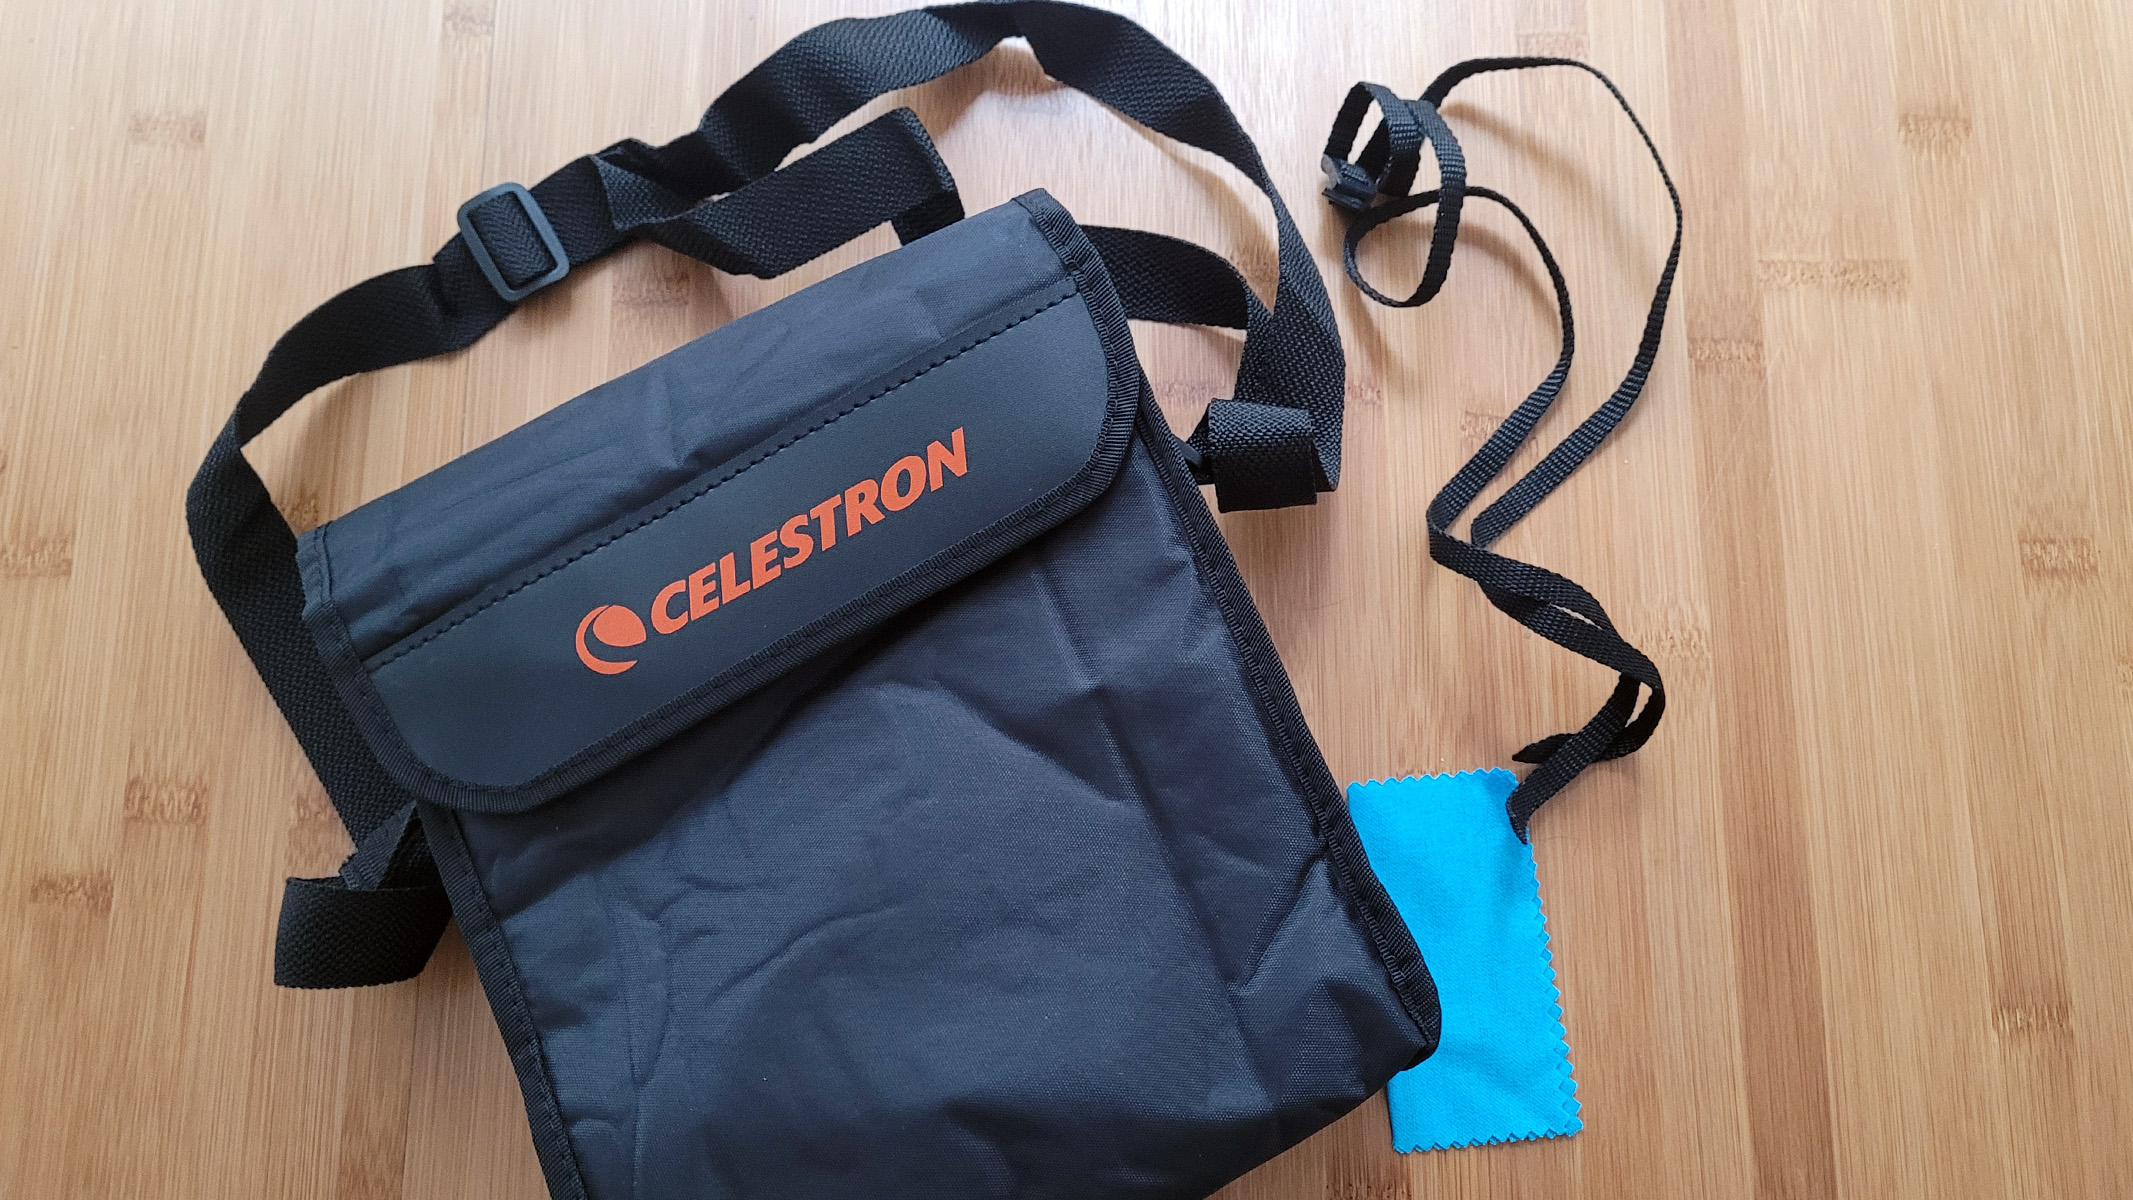 Photo showing the accessories thst come with the Celestron SkyMaster 12x60